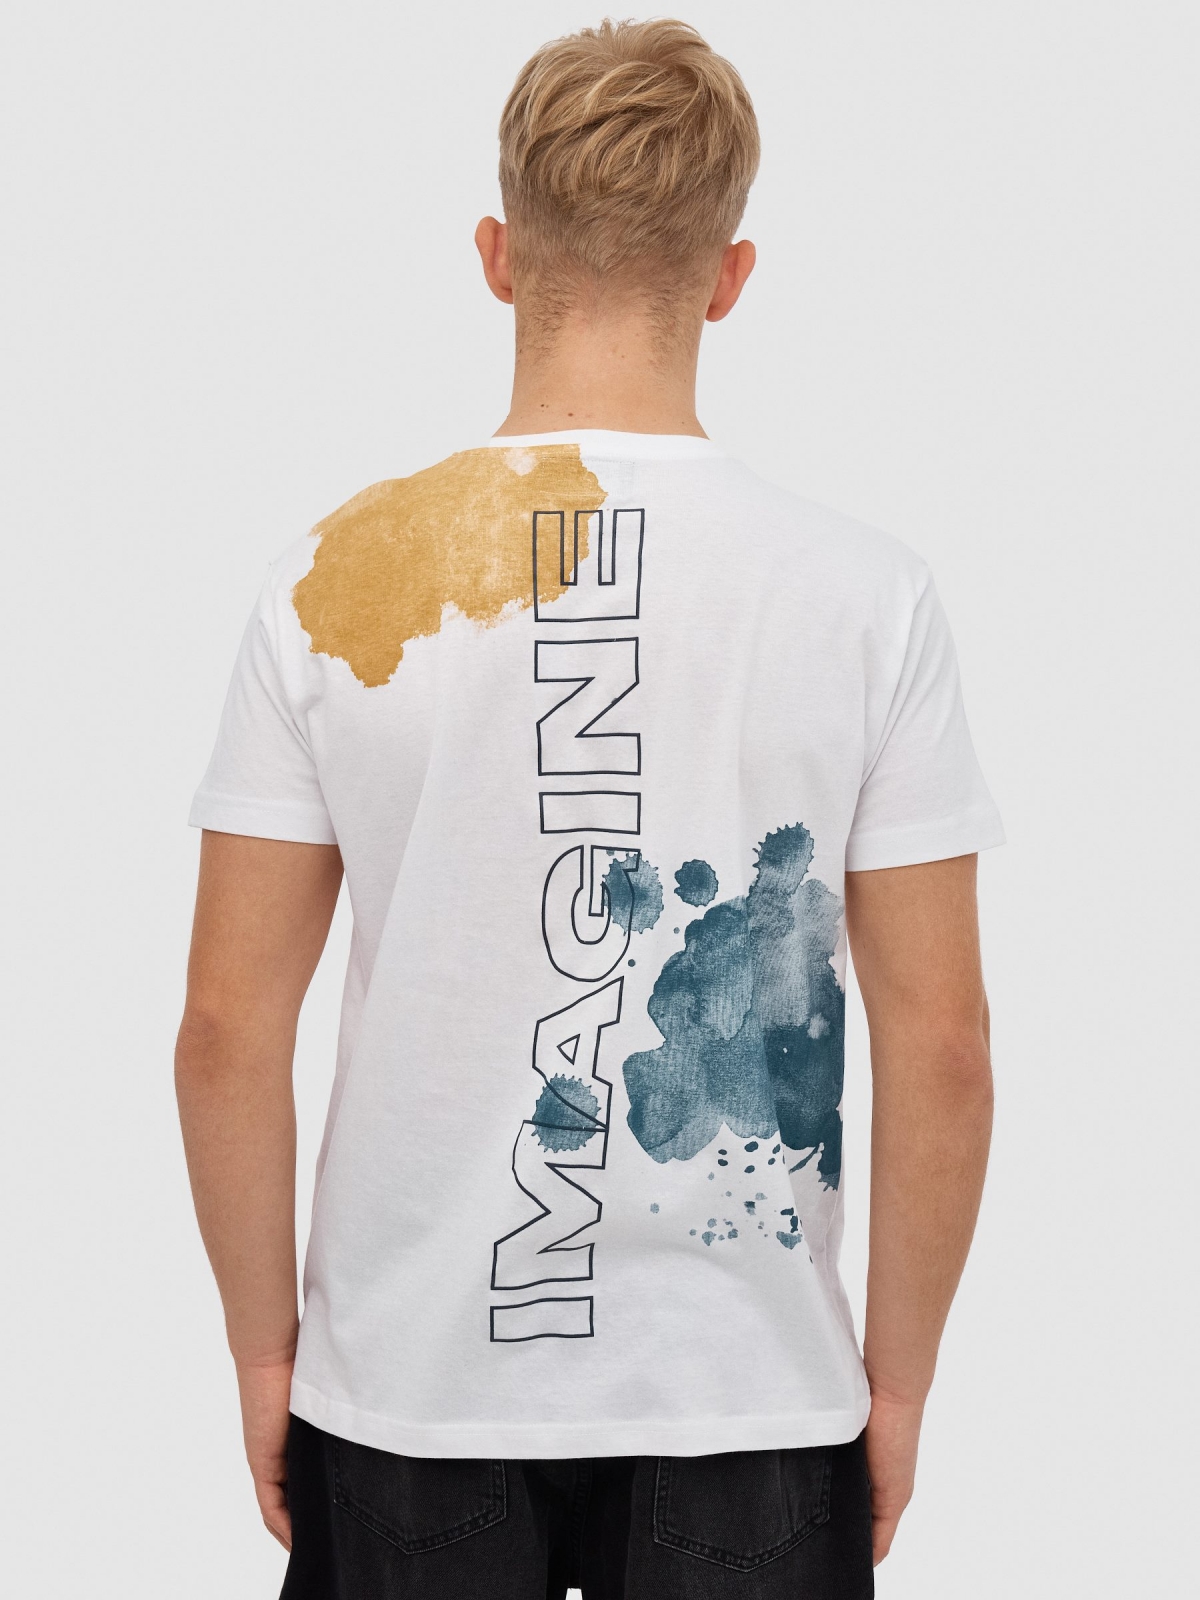 Imagine T-shirt white middle back view